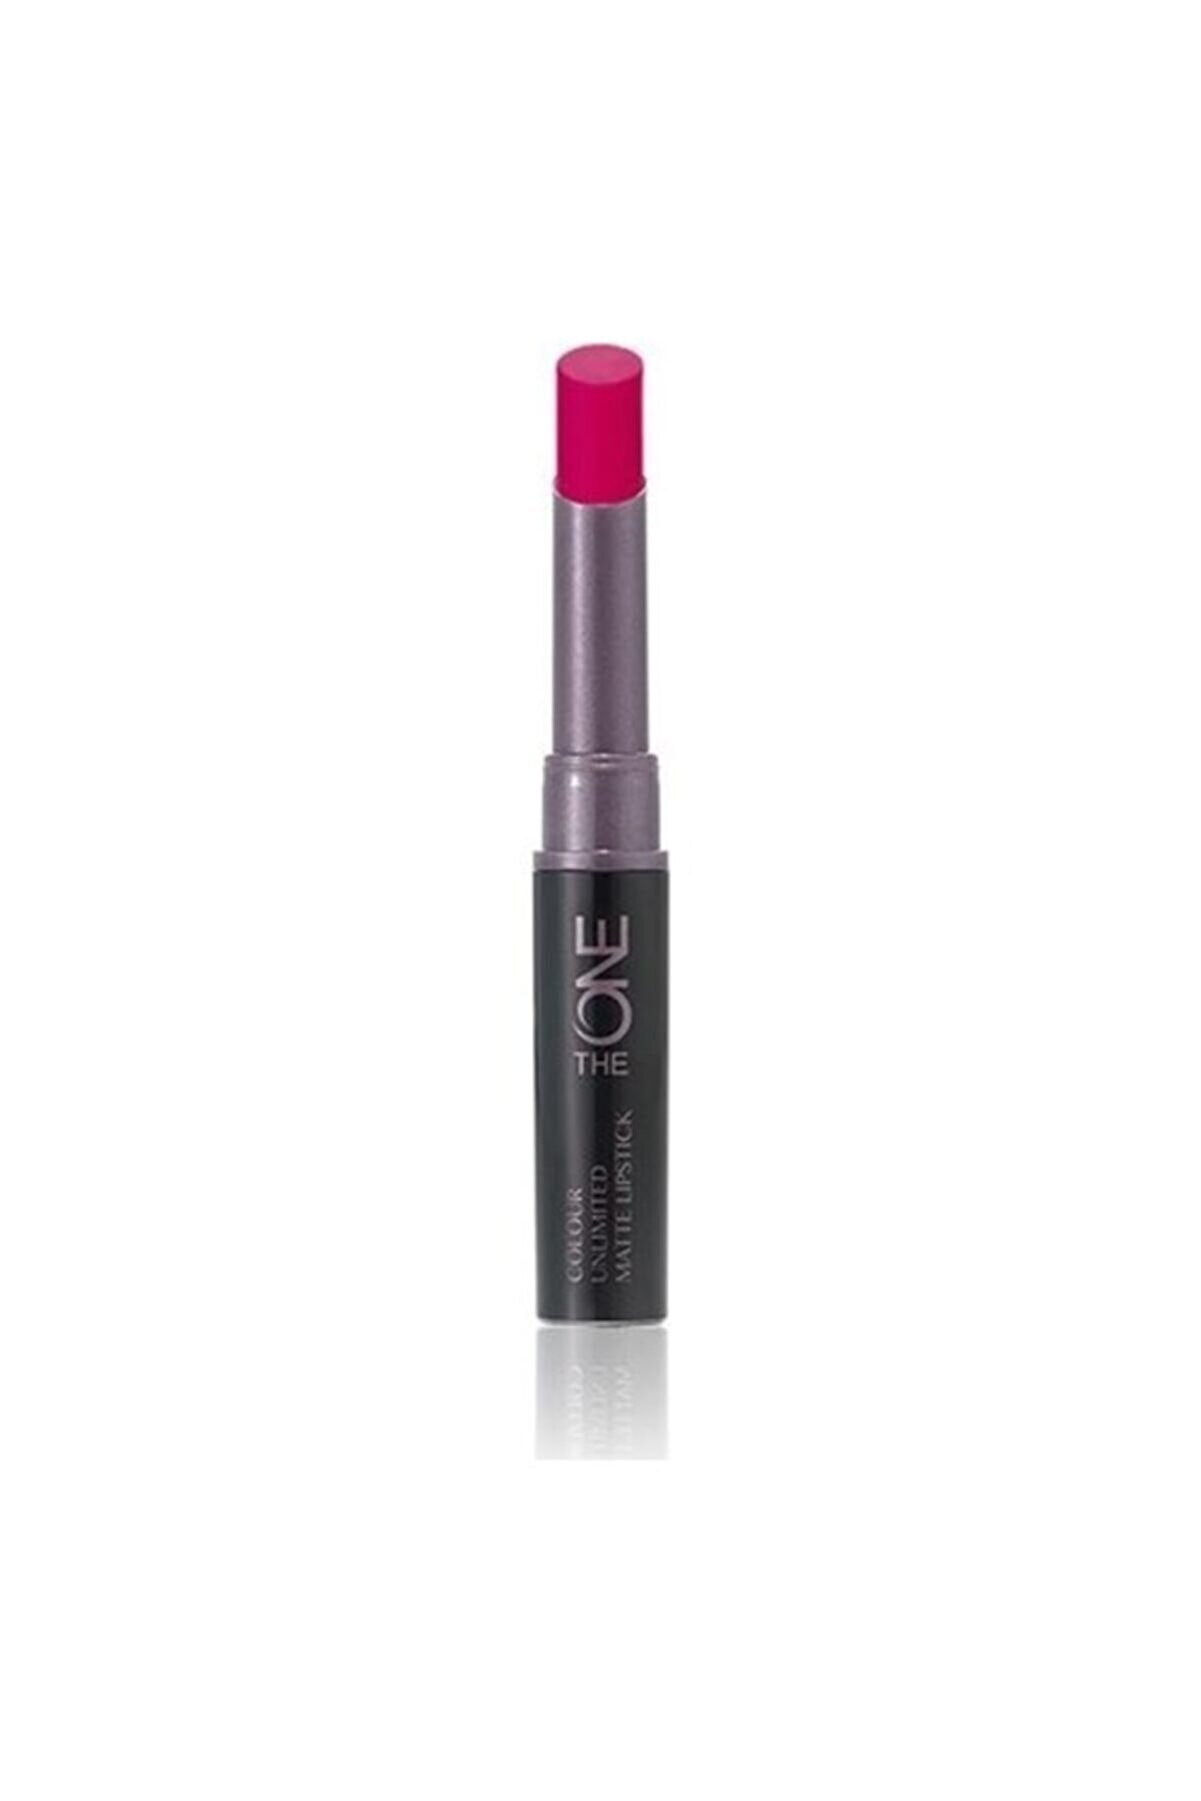 Oriflame The One Colour Unlimited Matte Lipstick Ruj Vivid Pink